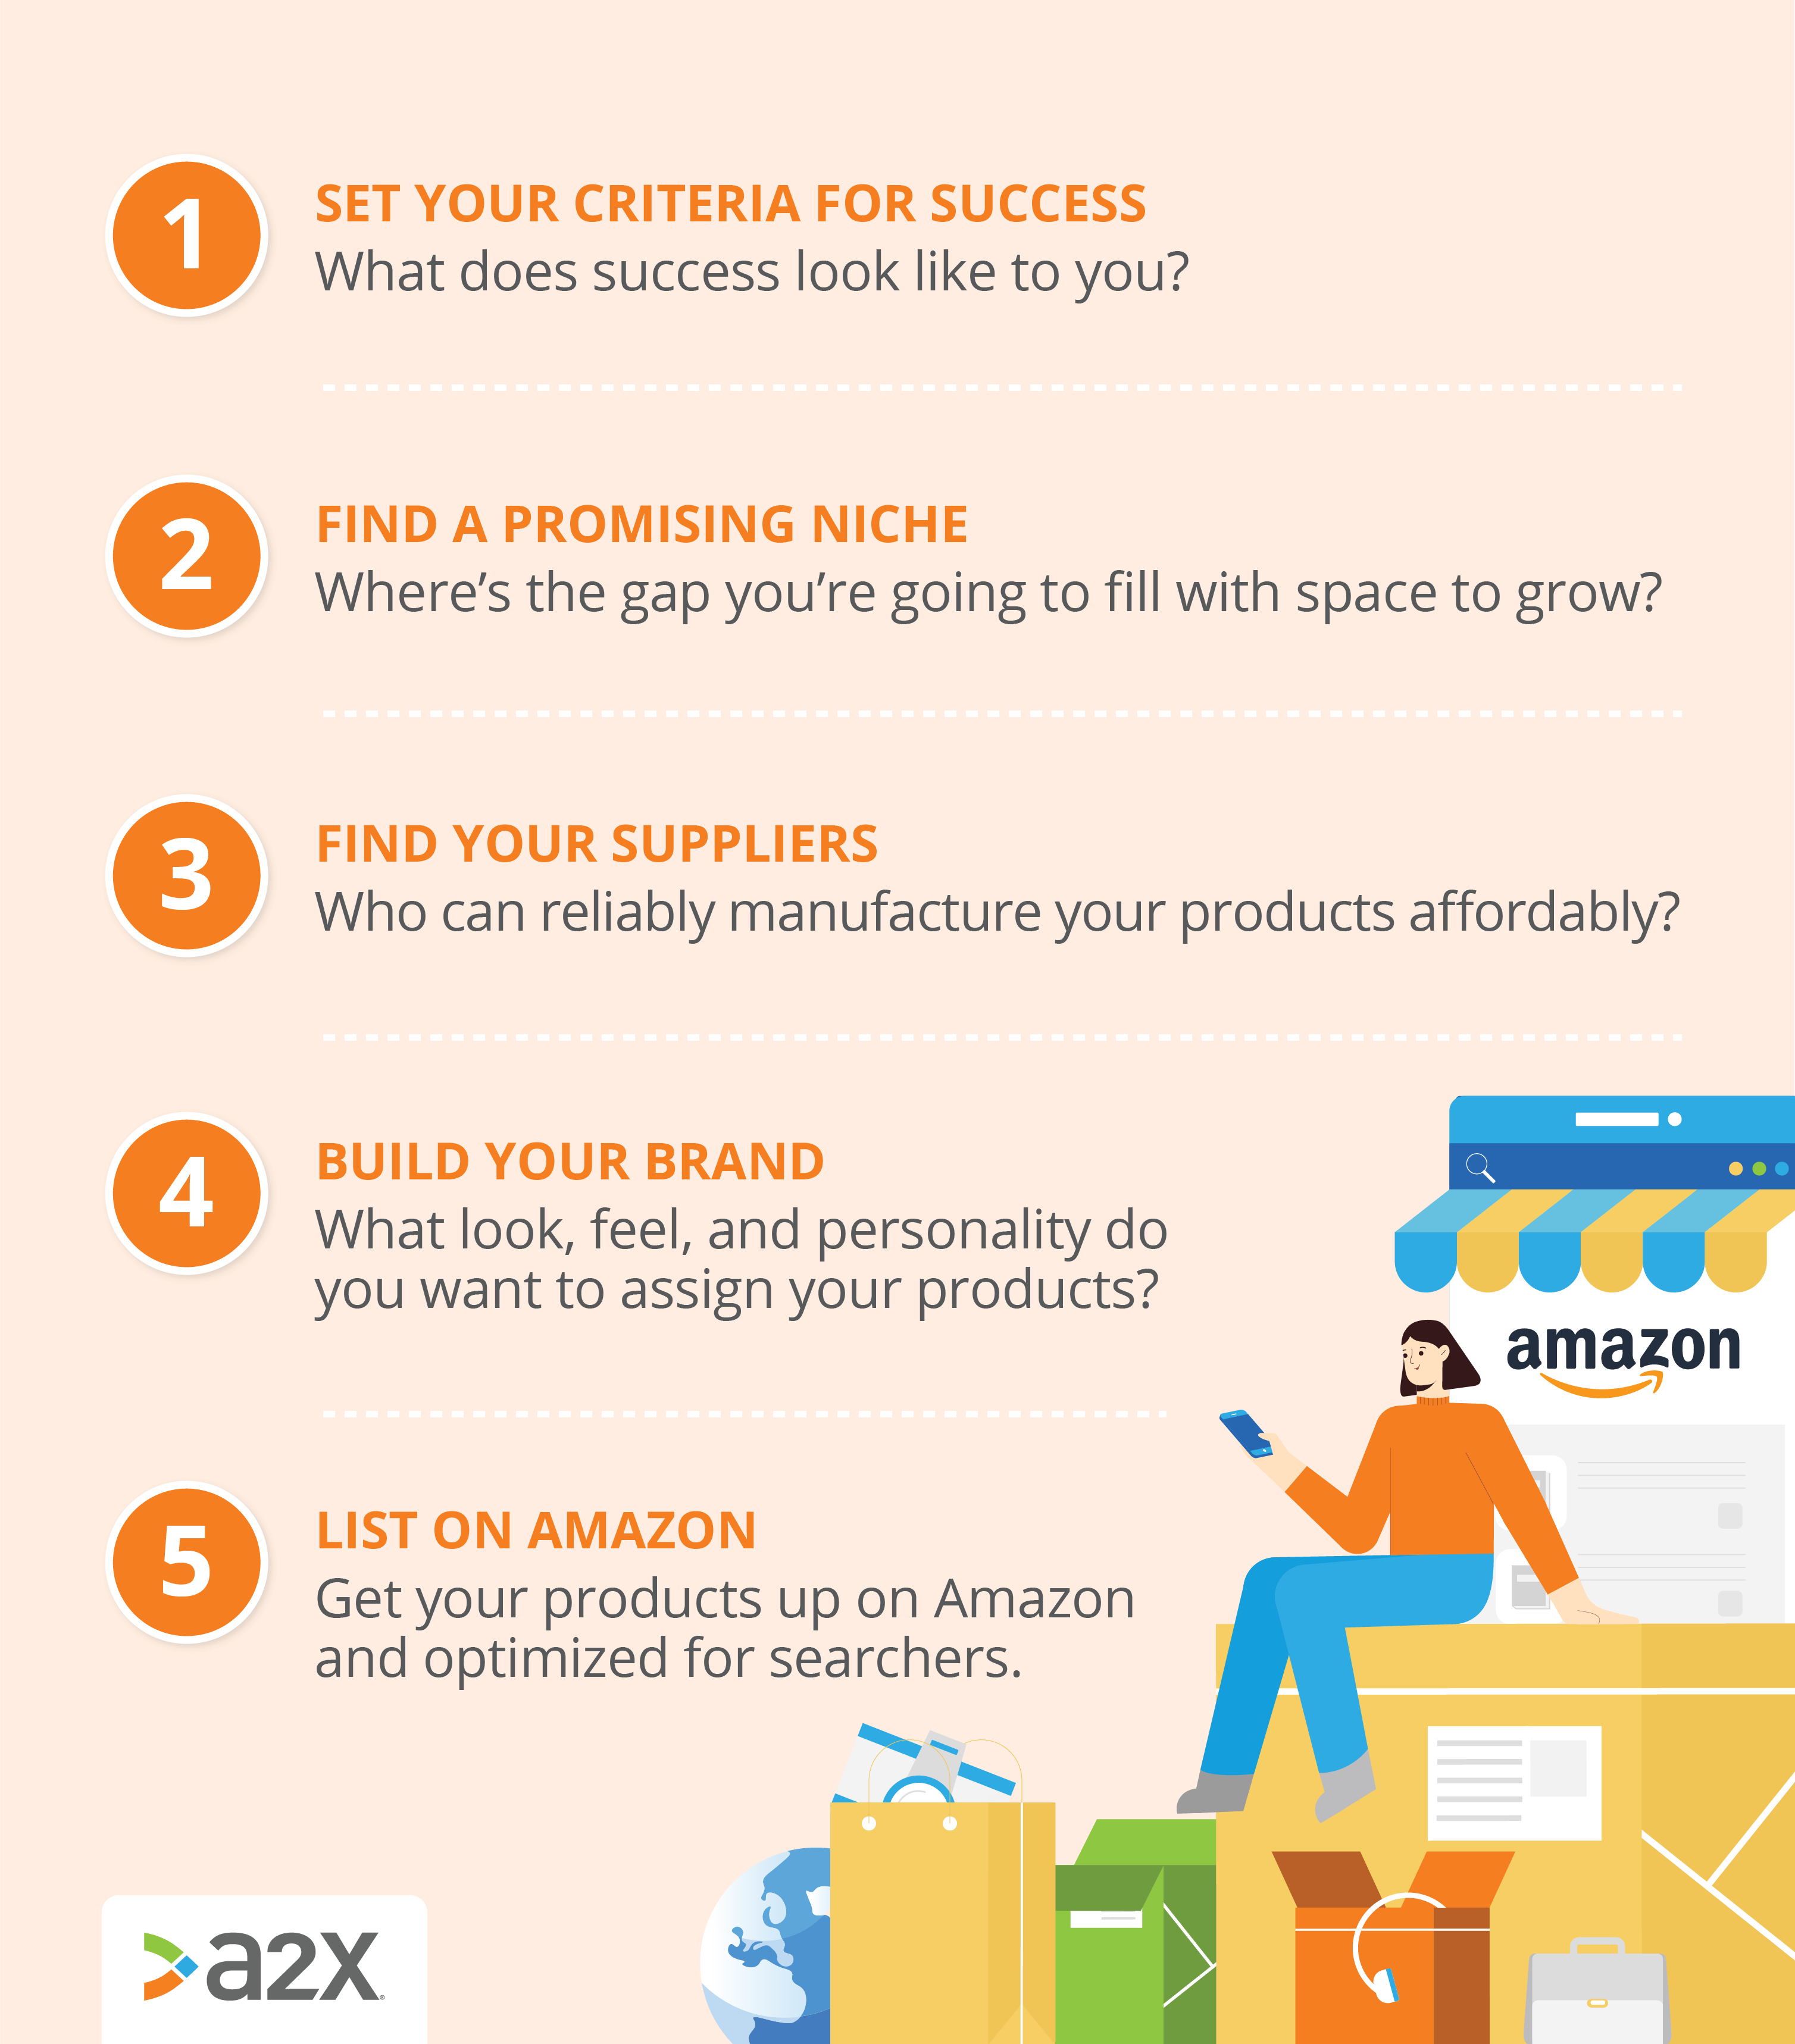 a graphic on how to set up an Amazon private label business: set your criteria for success, find a promising niche, find your suppliers, build your brand, and list on Amazon